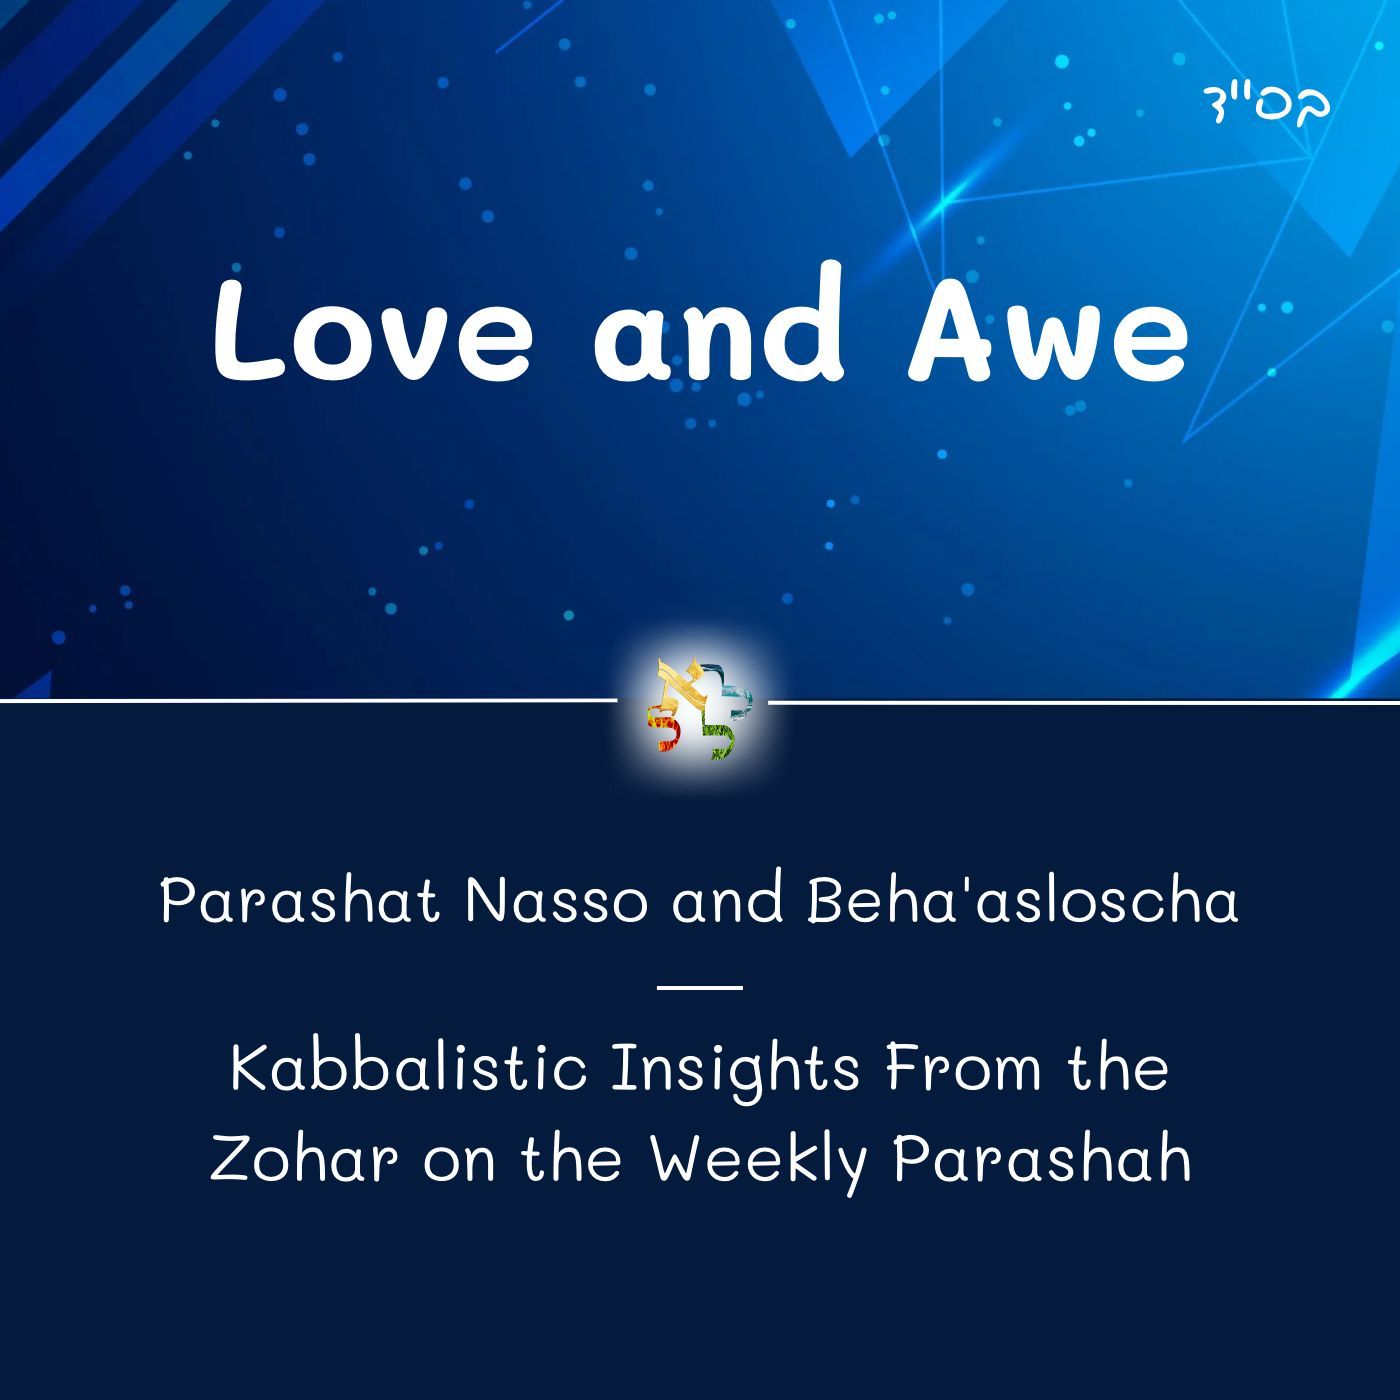 Love and Awe - Kabbalistic Inspiration on the Parasha from the Zohar